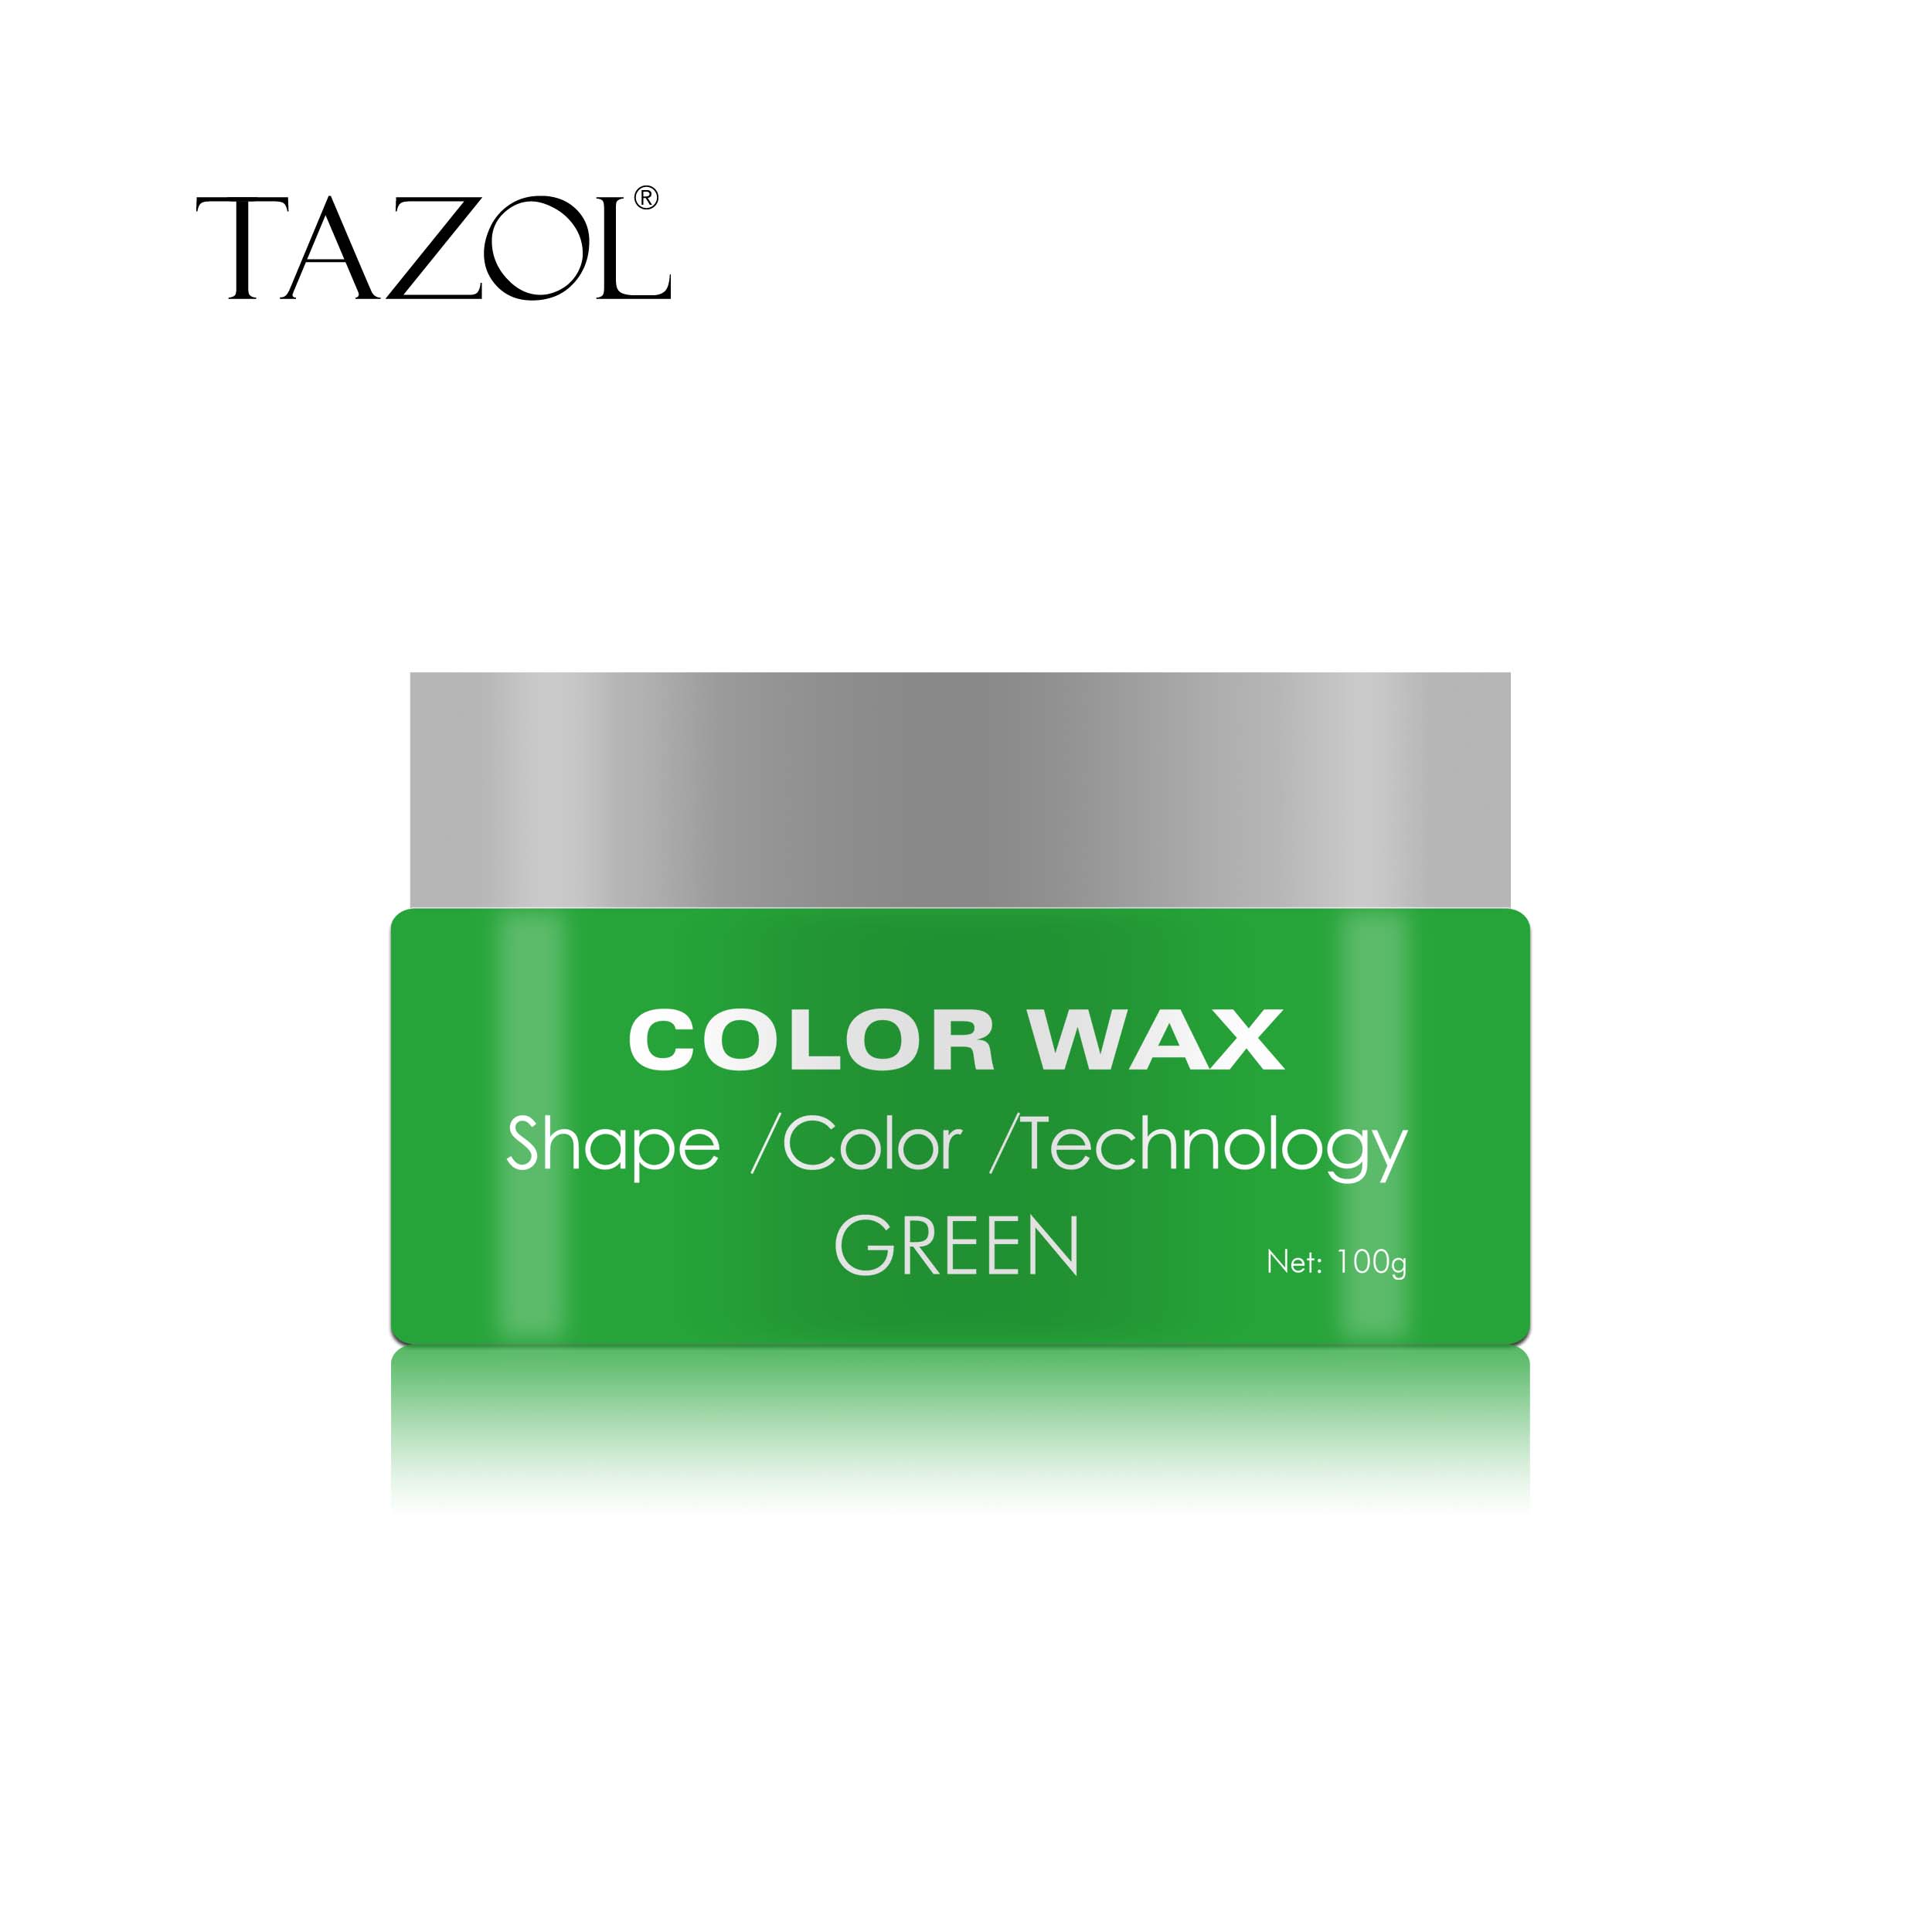 Tazol Temporary Hair Color Wax with Green Color 100g